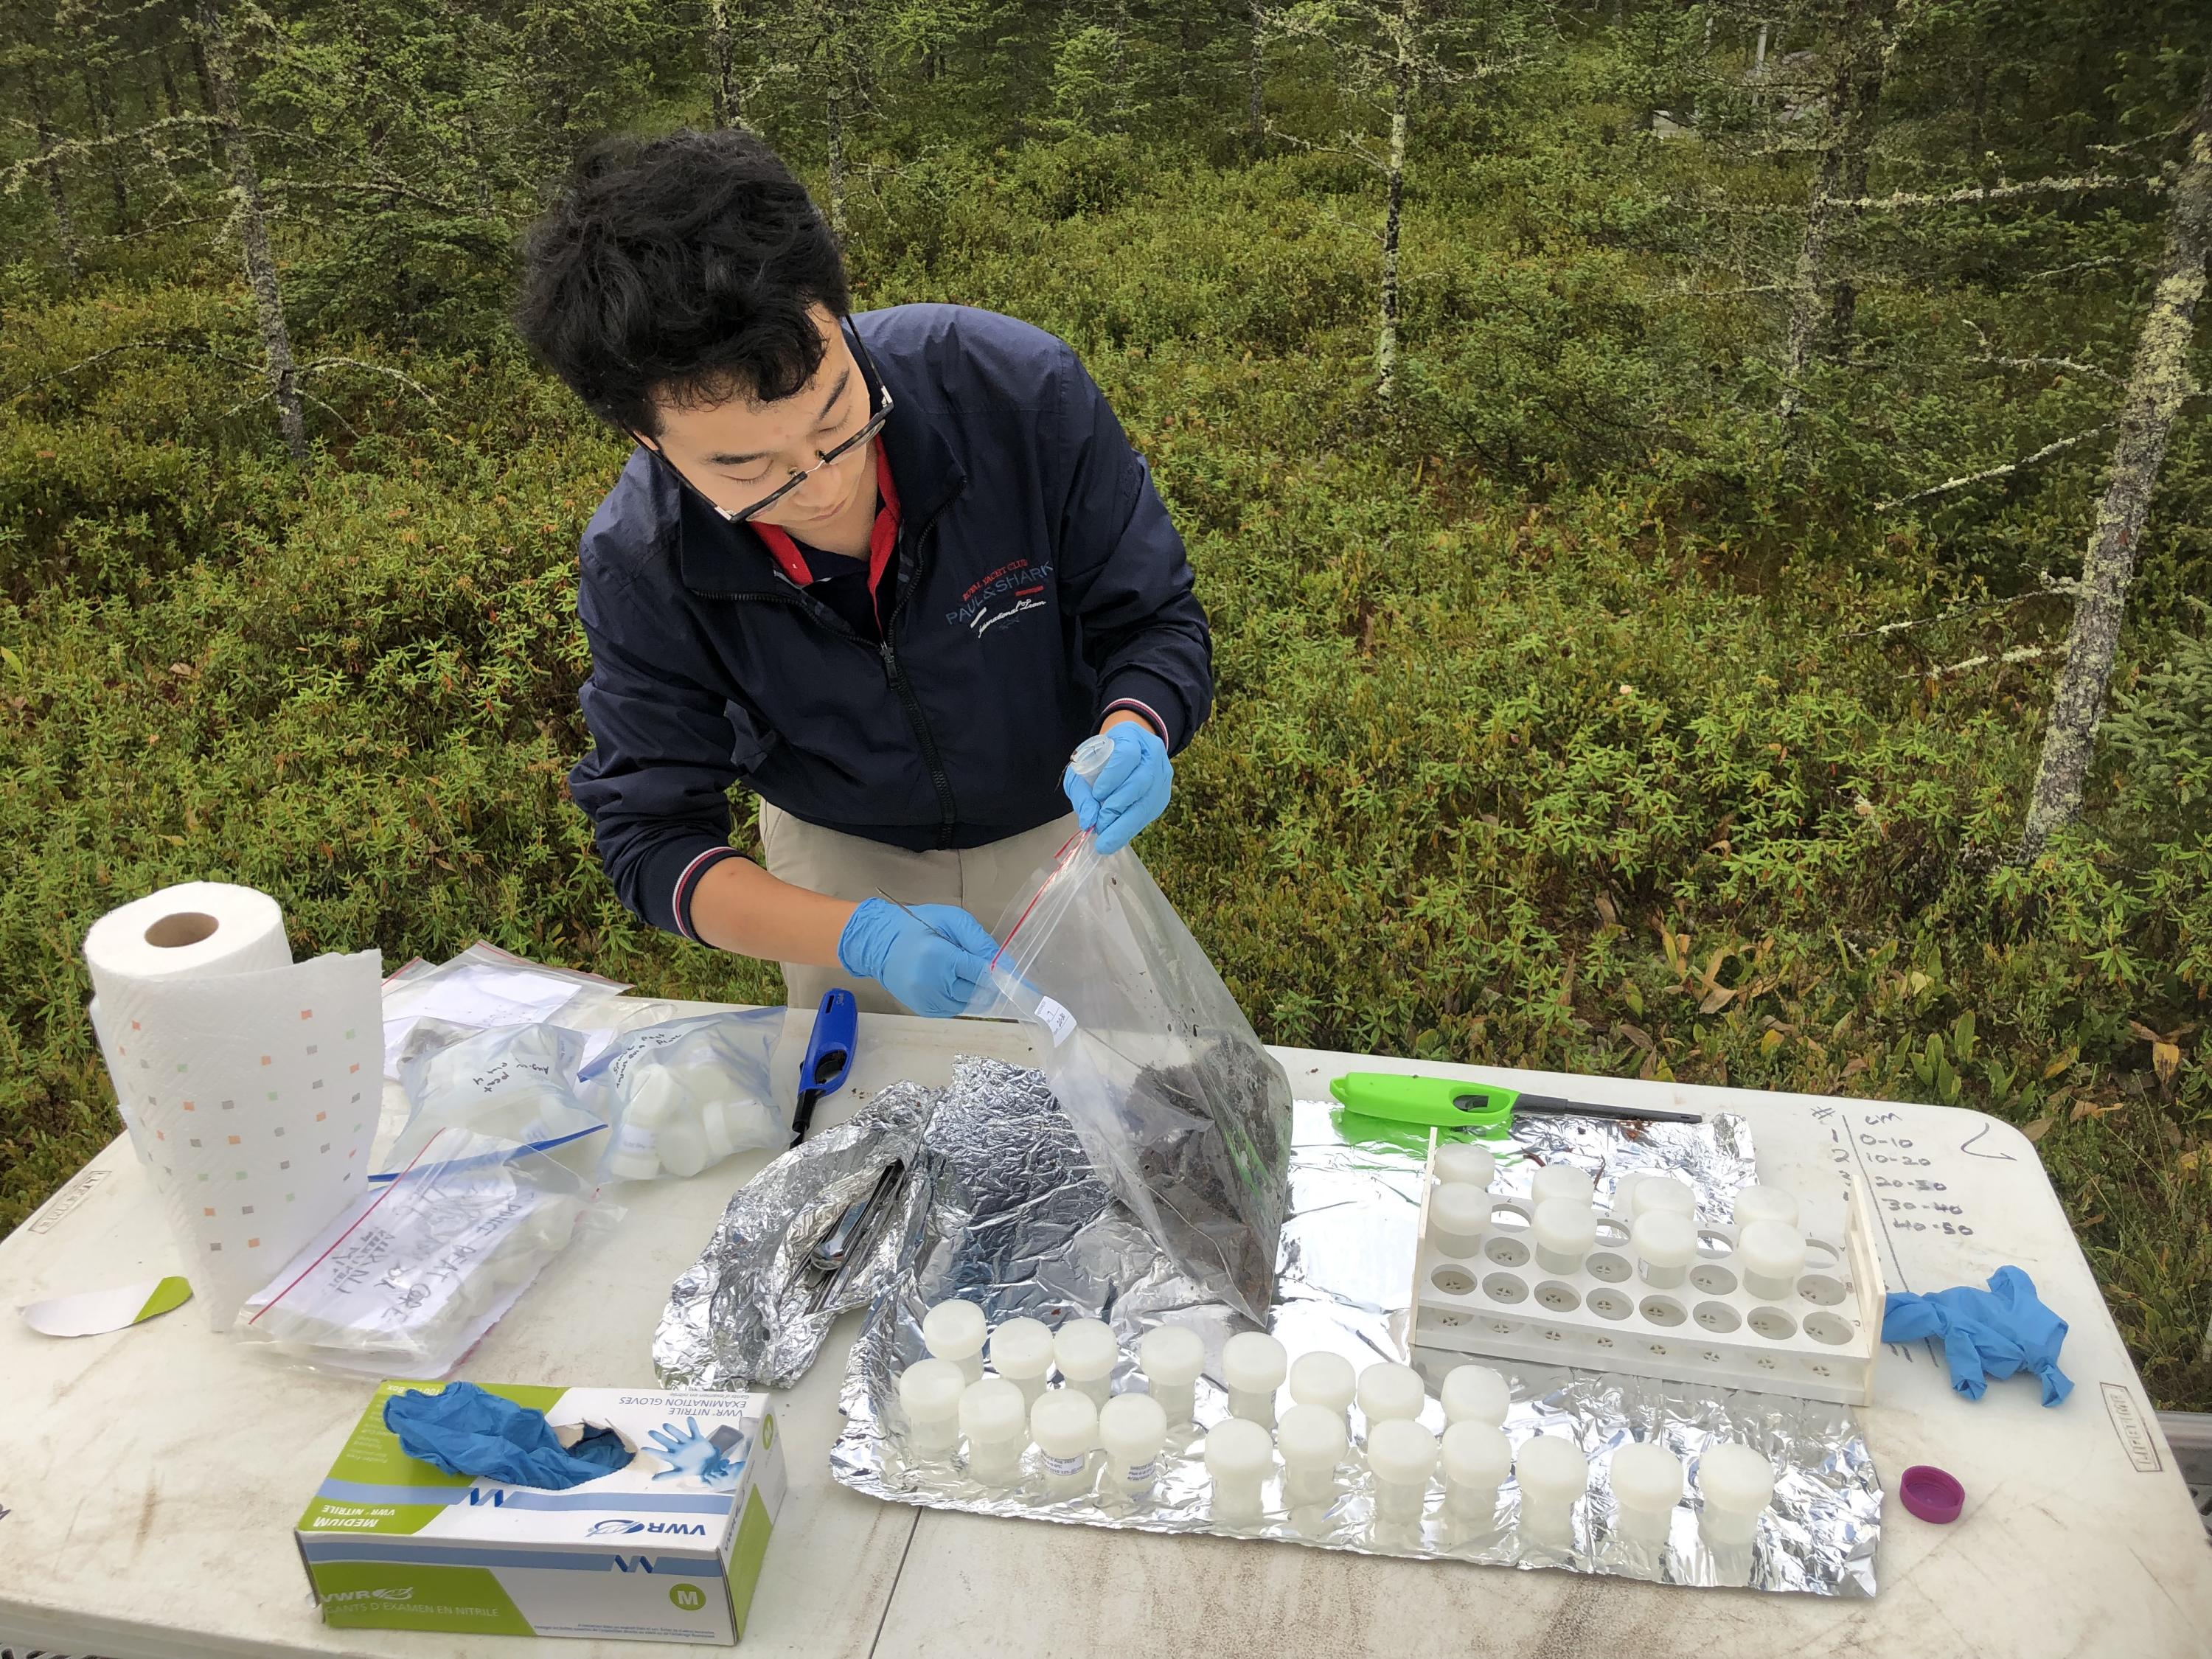 Ph.D. student Tianze Song from the School of Biological Sciences prepares soil samples for metagenomics investigations during the annual soil core collection of the SPRUCE experiment. (Photo Joel Kostka)